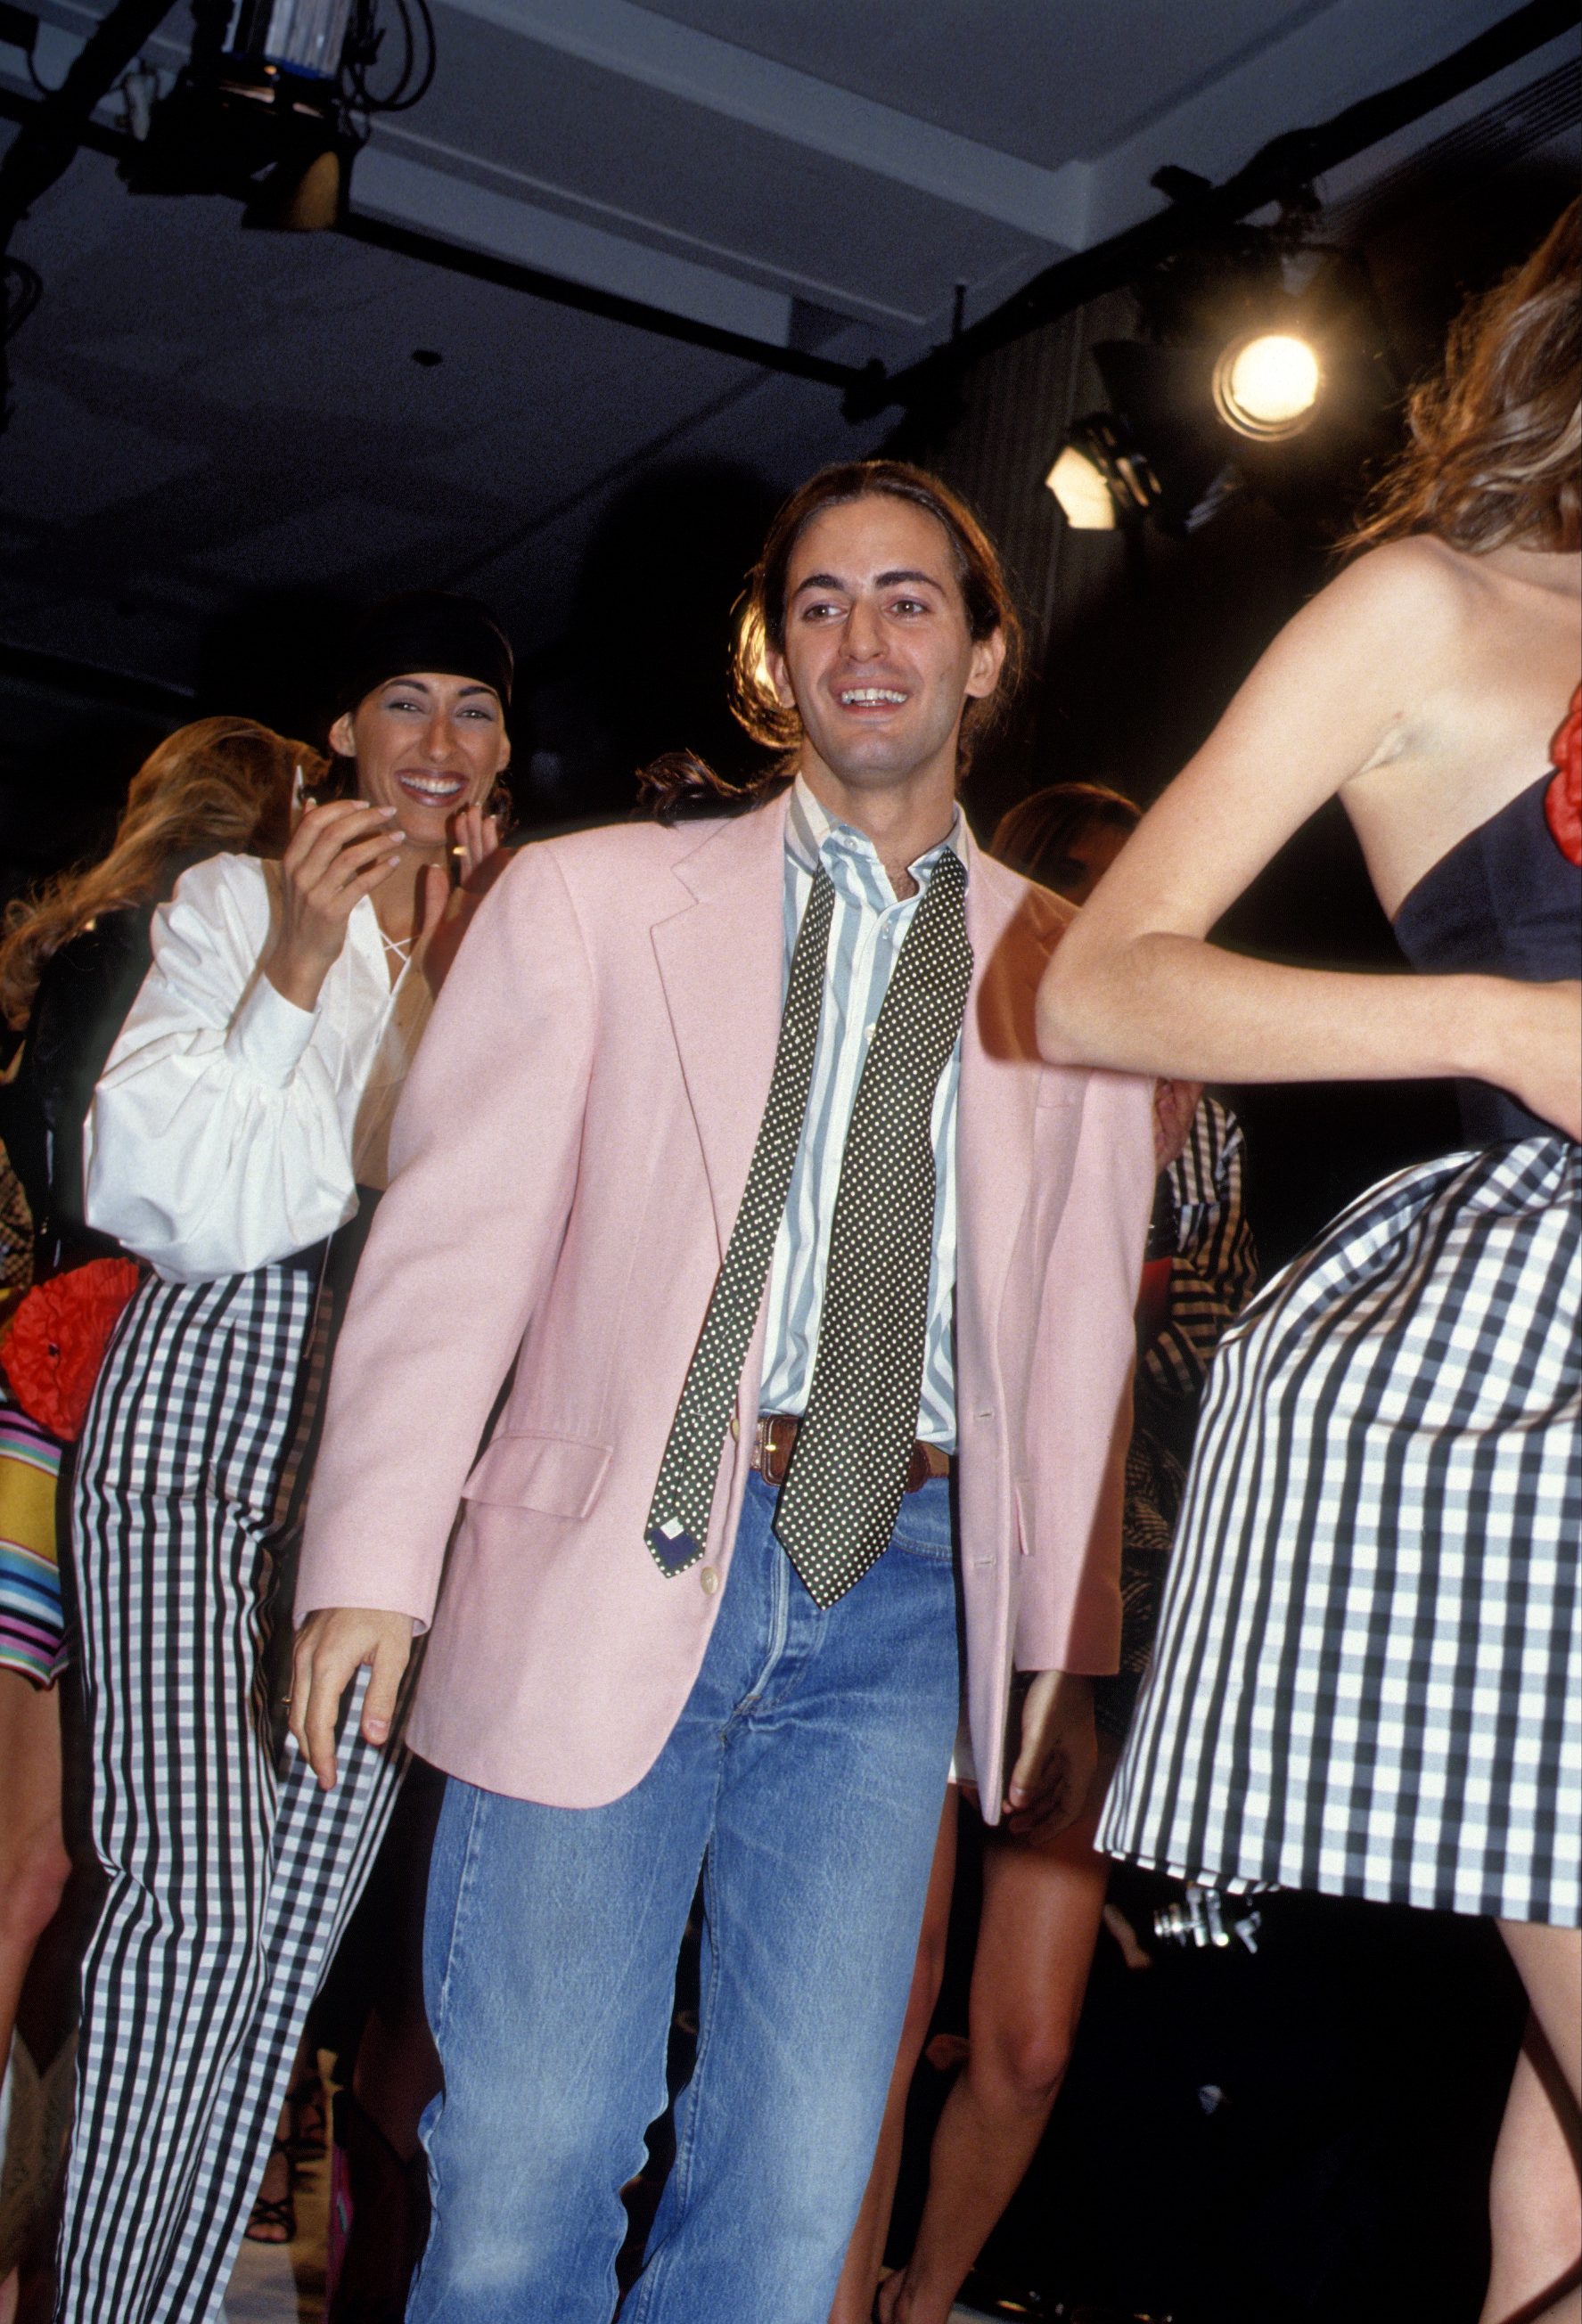 Marc Jacobs' best outfits